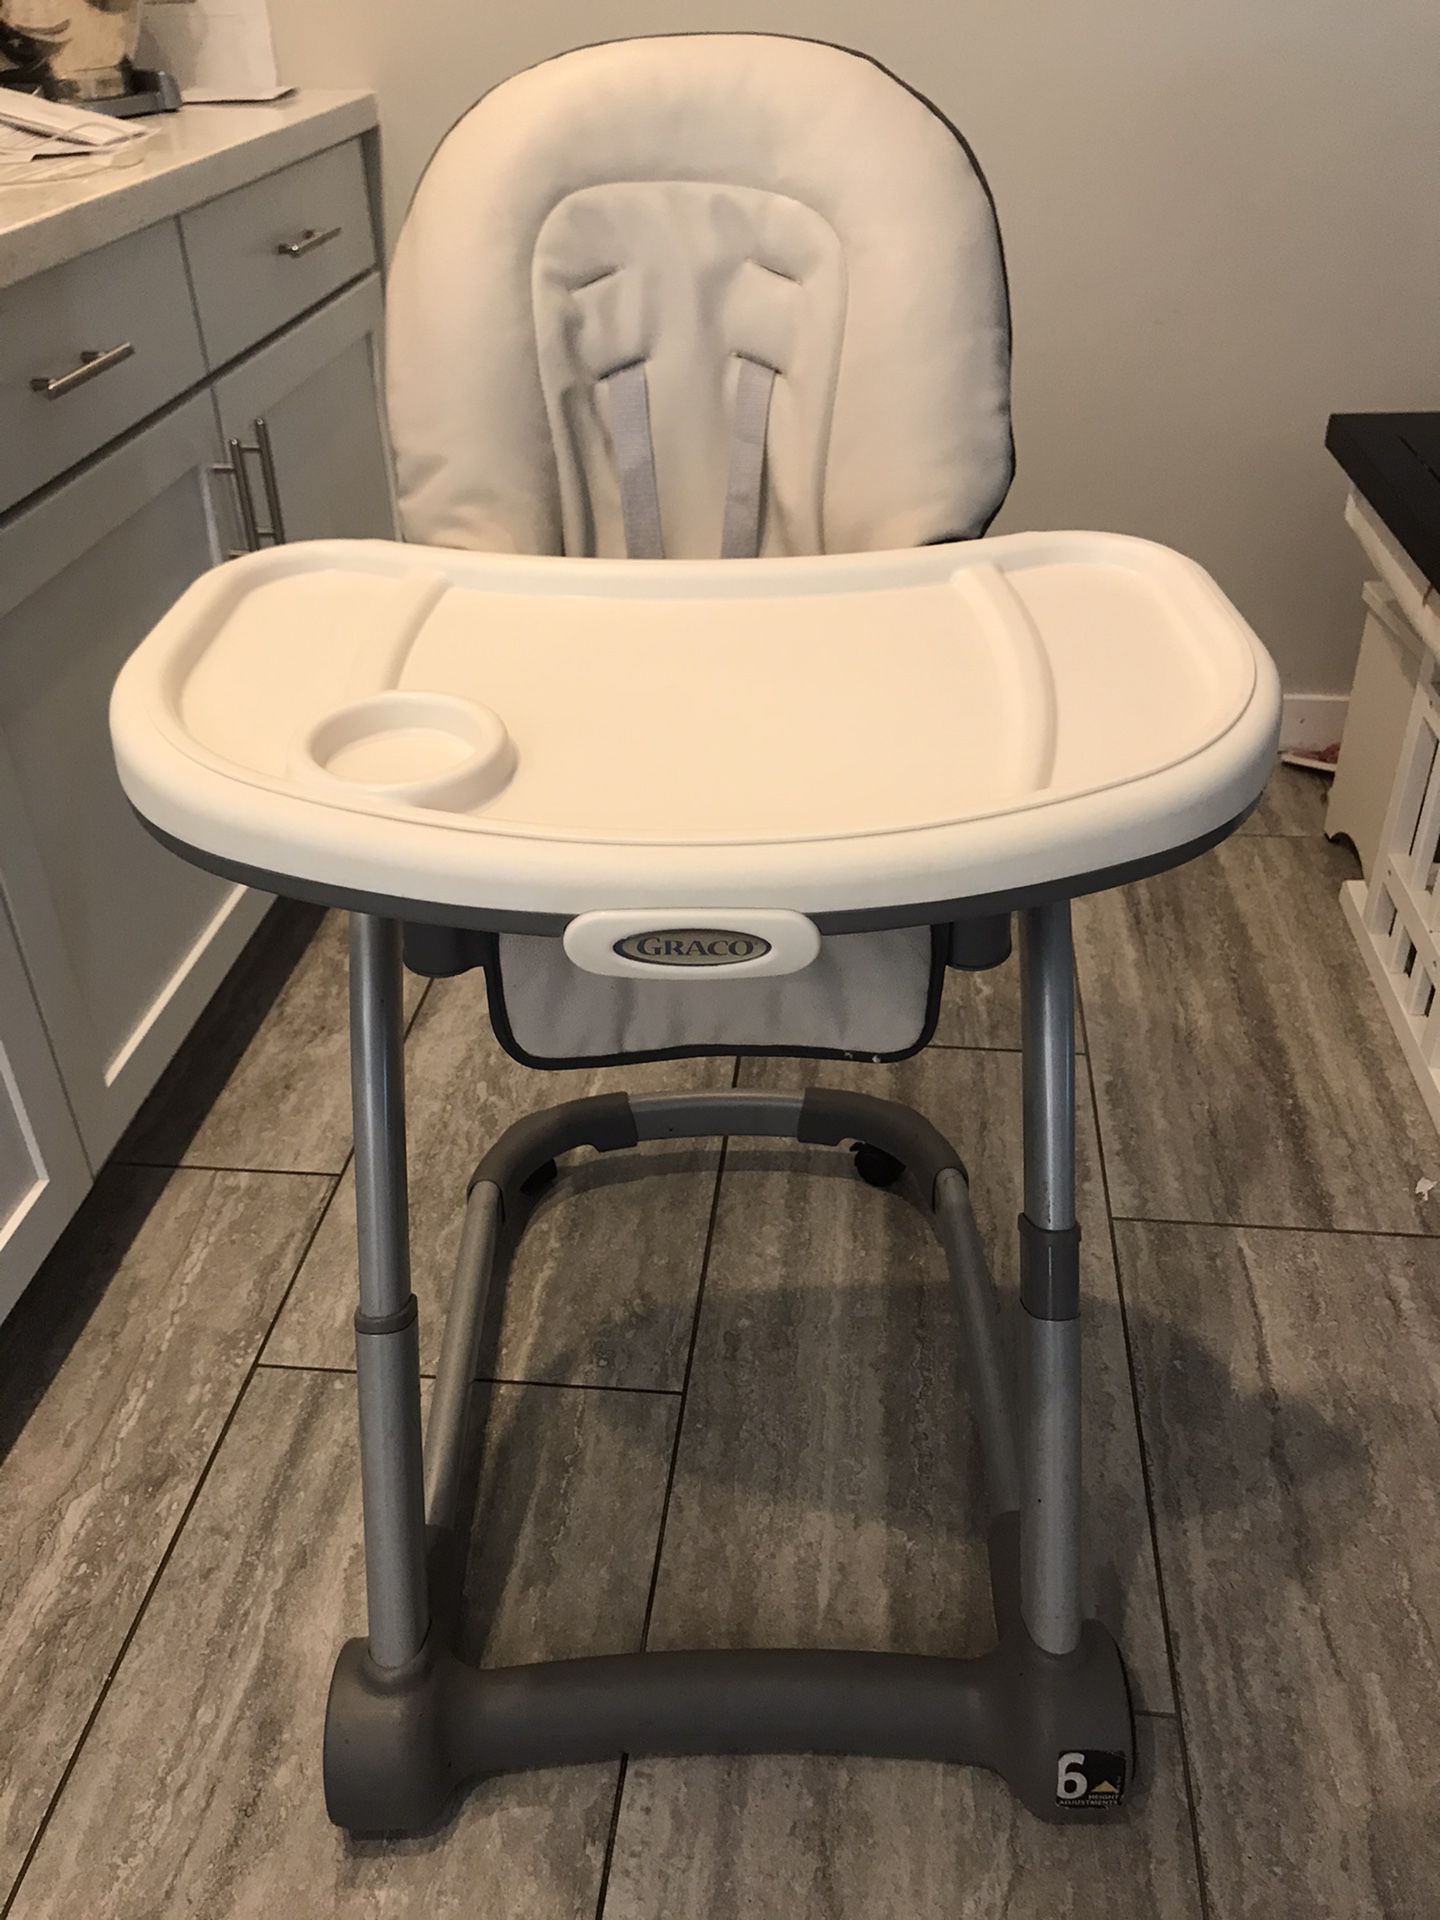 Graco convertible high chair, 6 in 1